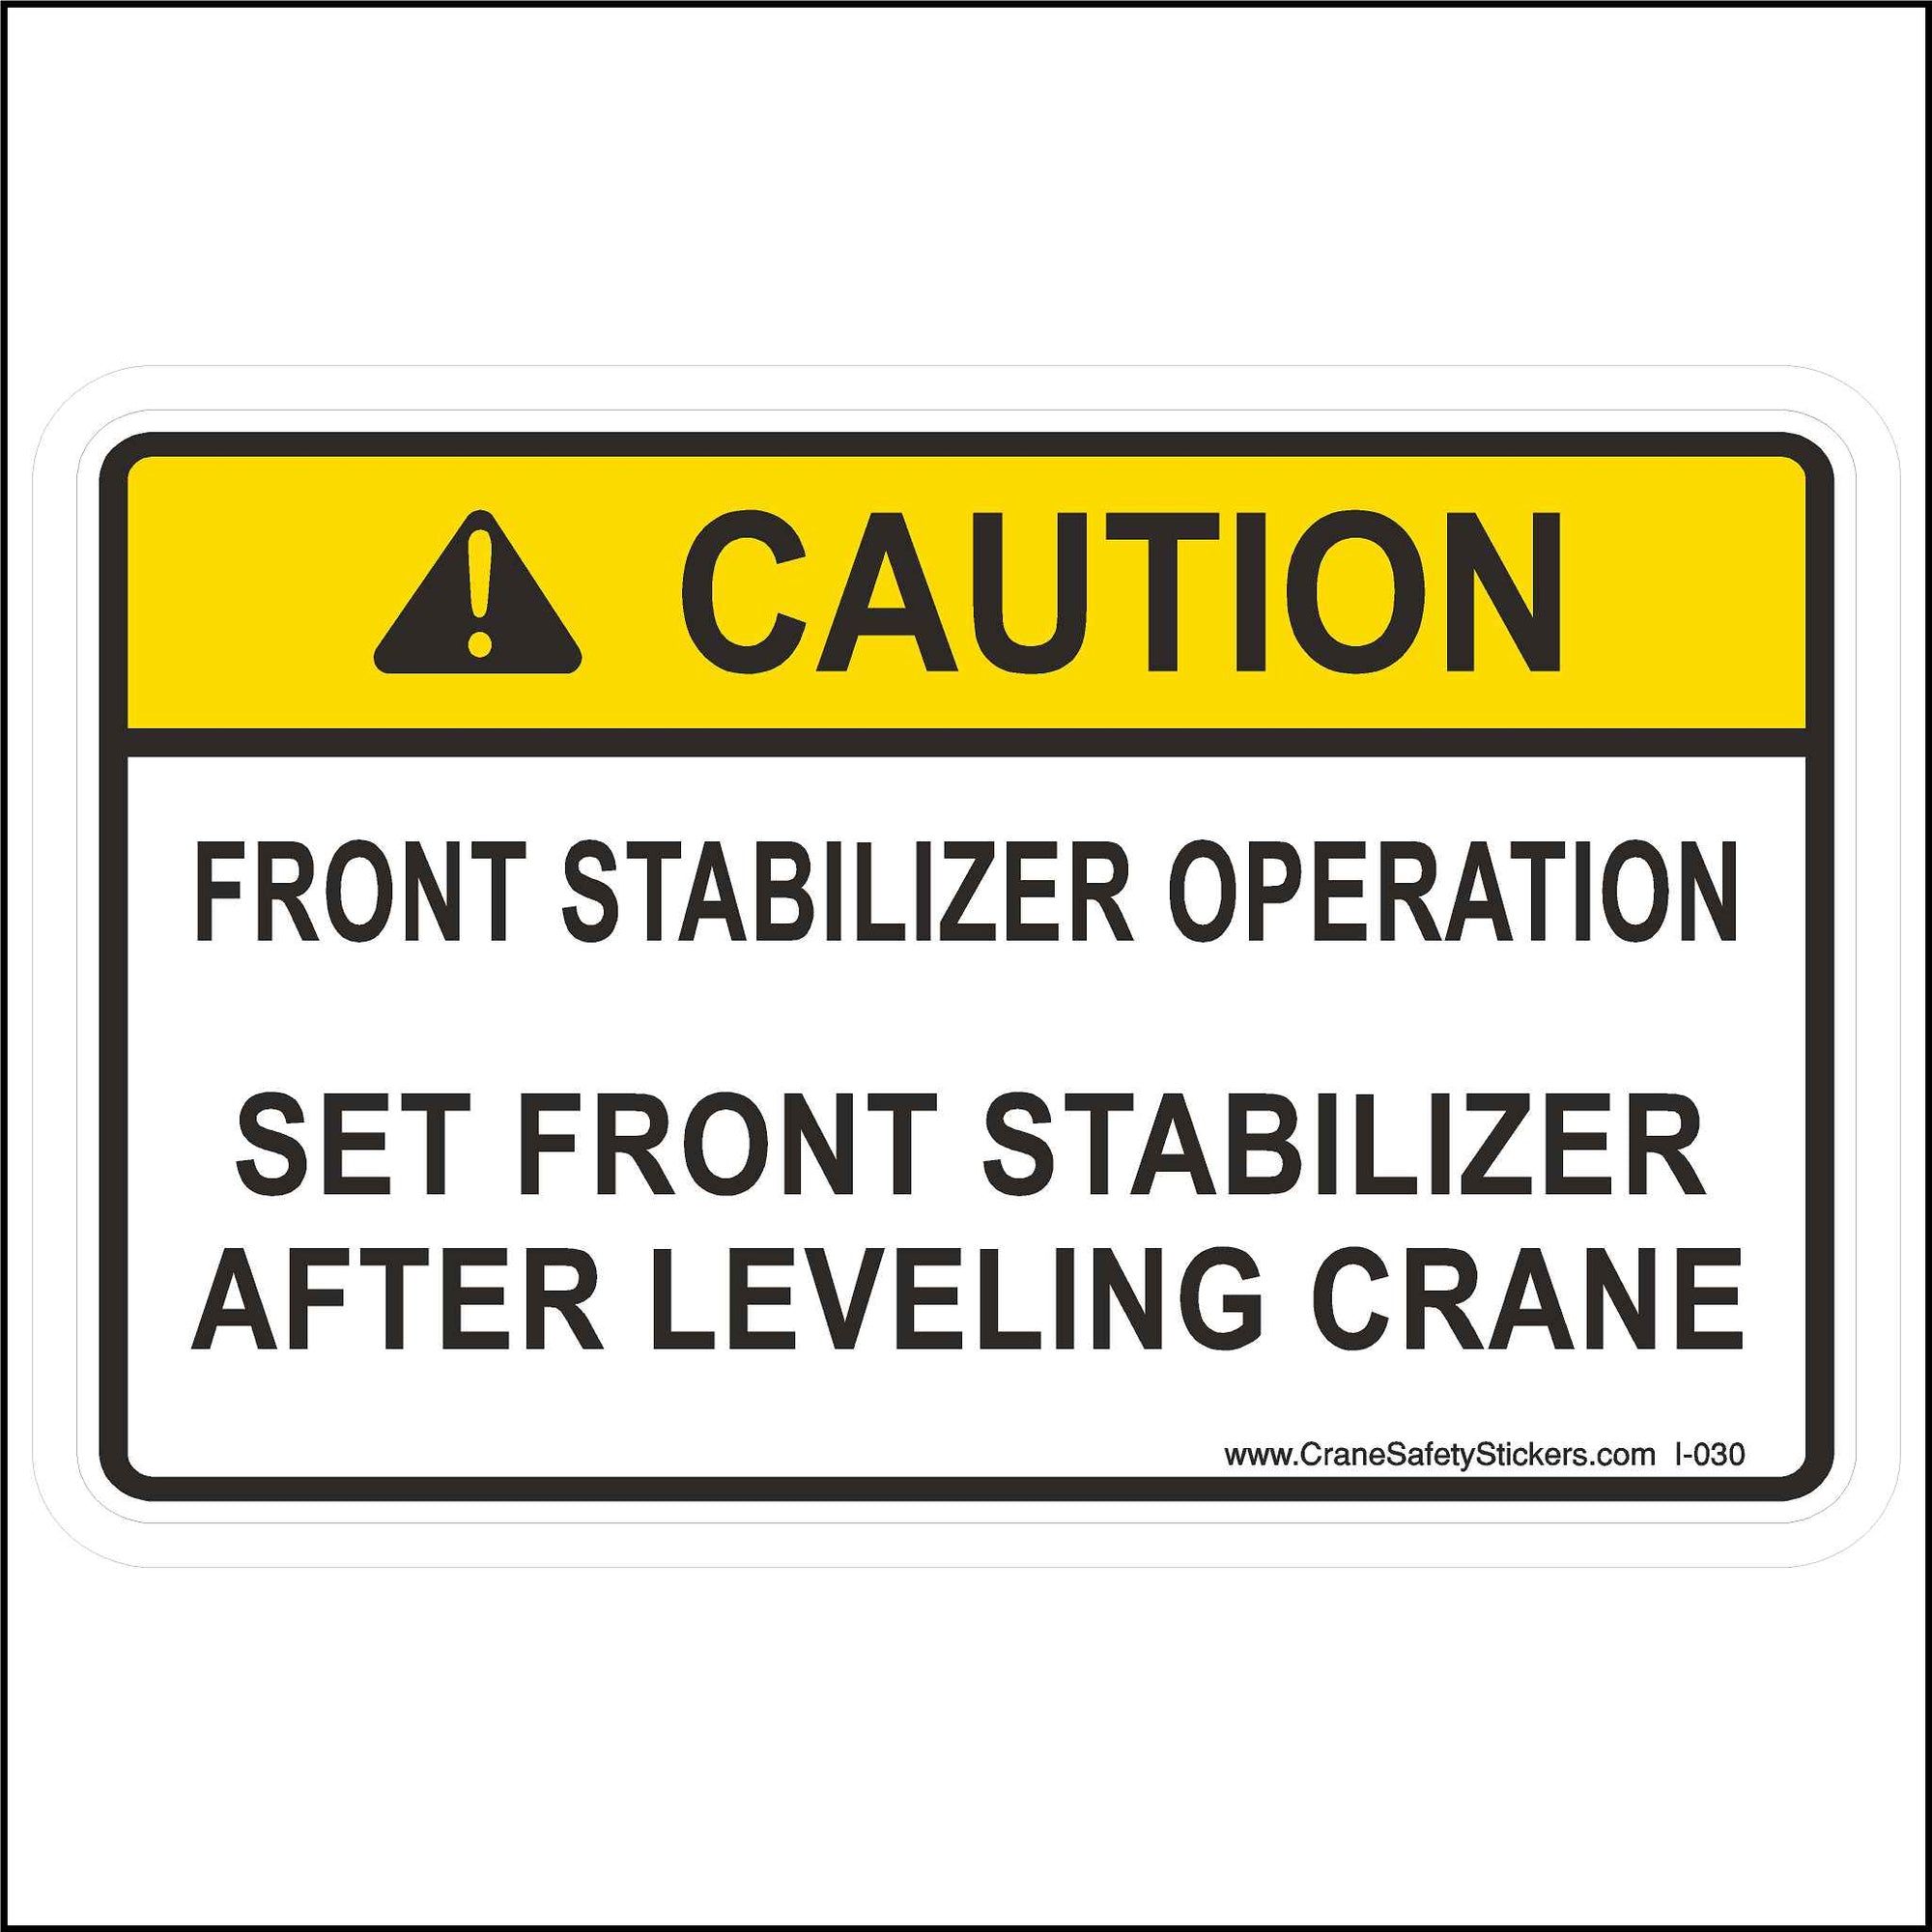 Front Stabilizer Operation Label Printed With. CAUTION  Front Stabilizer Operation  Set the Front Stabilizer After Leveling the Crane.